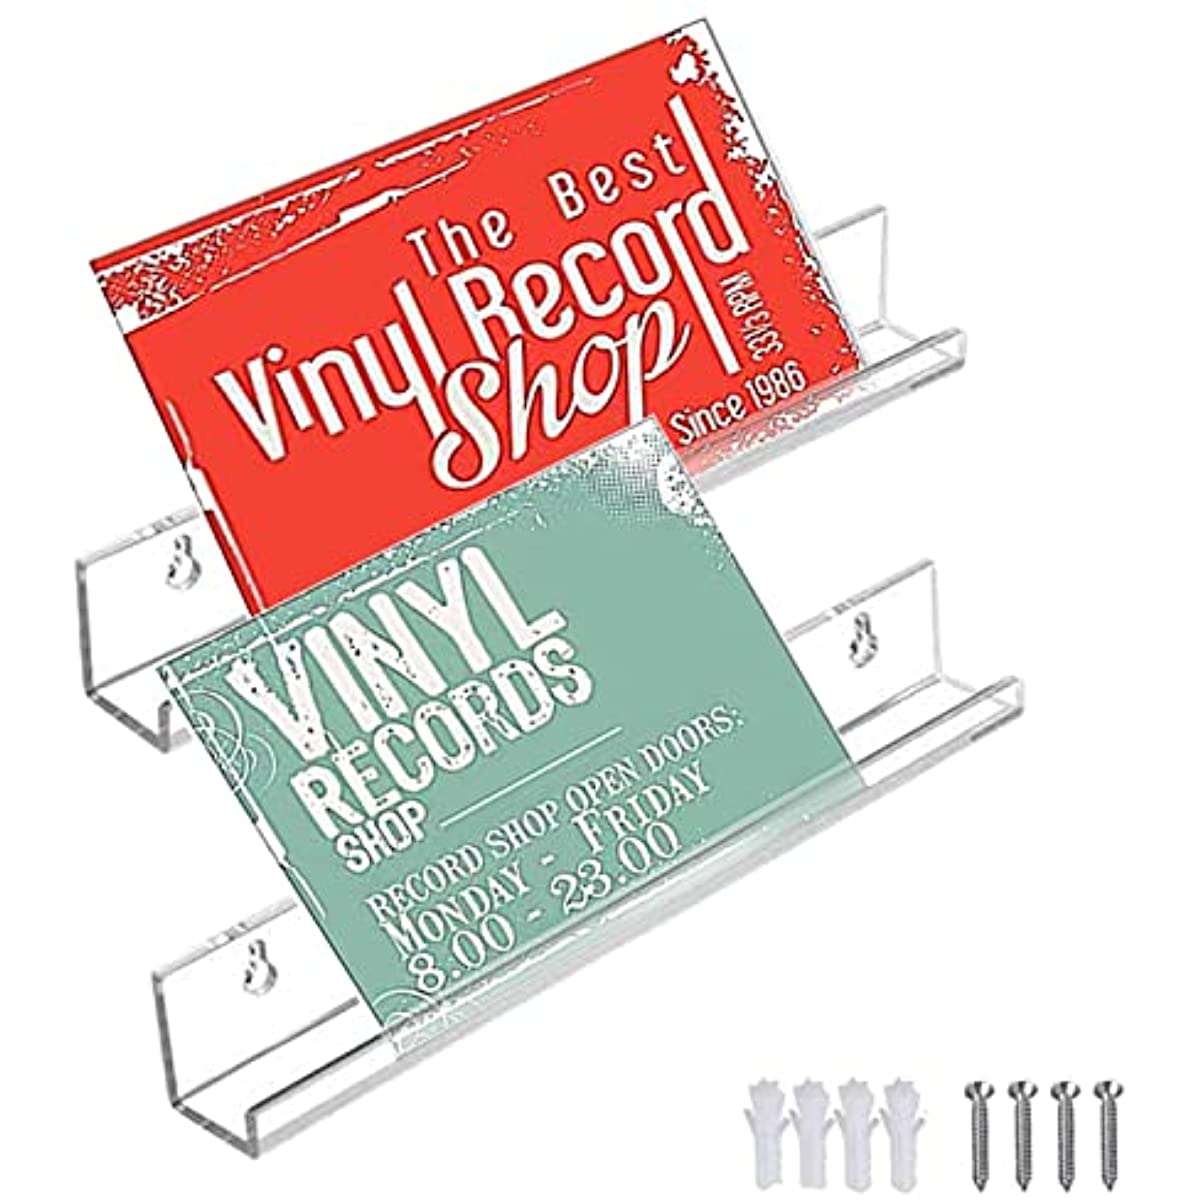 Vinyl Record Wall Mount-2 Pack | No Wall Damage | Floating Shelf | Black &  White Album Holder | Display Your Best LPs